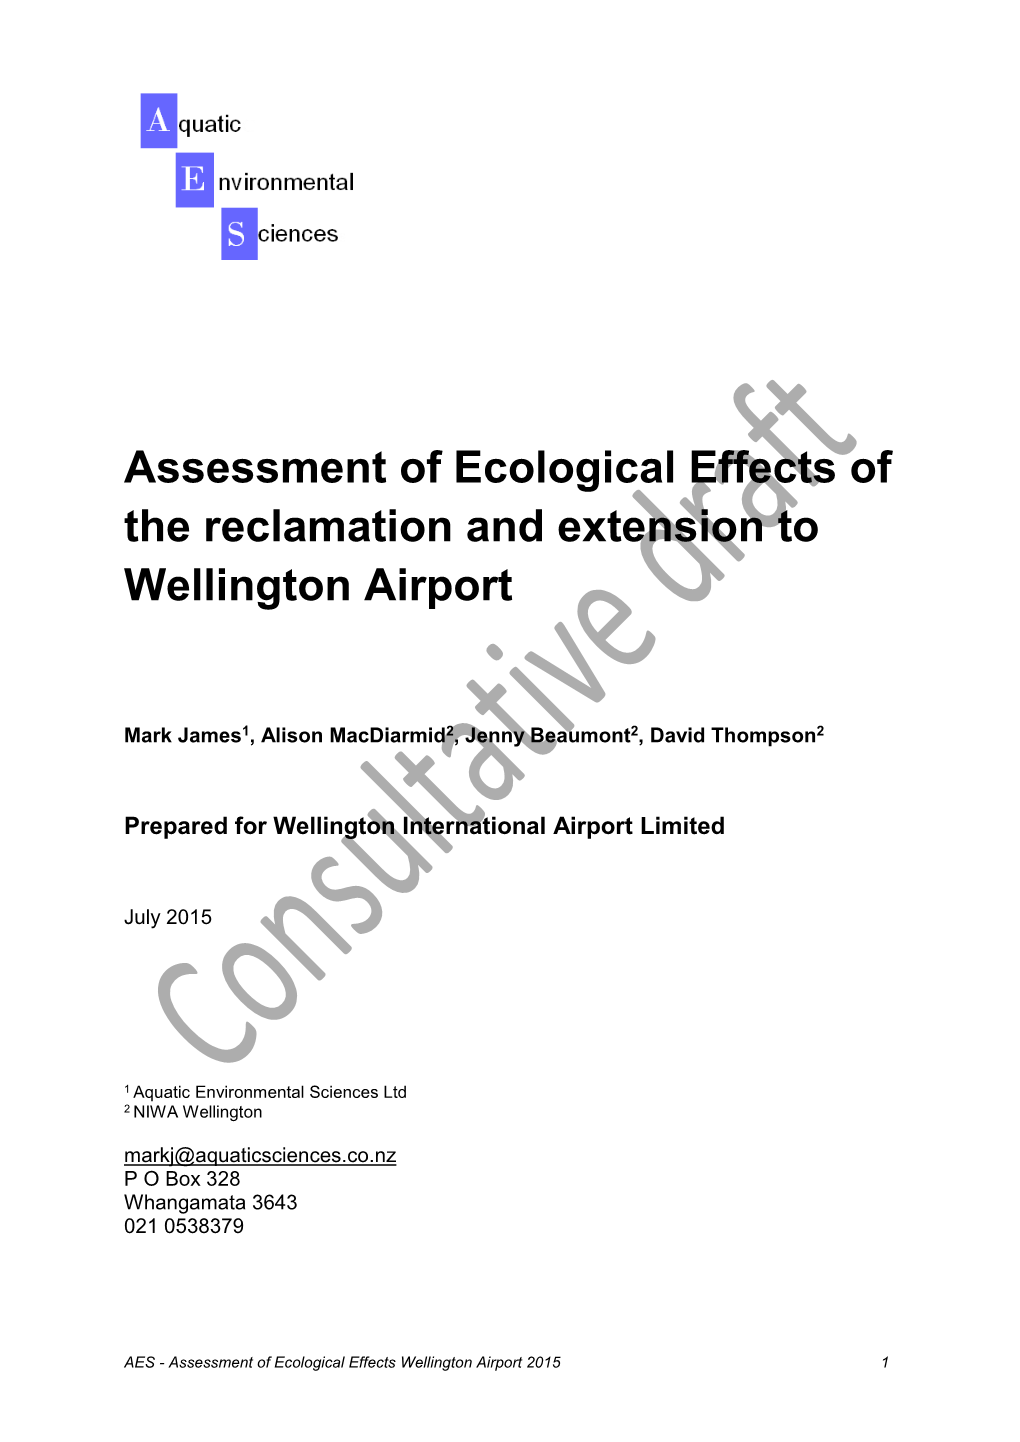 Assessment of Ecological Effects of the Reclamation and Extension to Wellington Airport